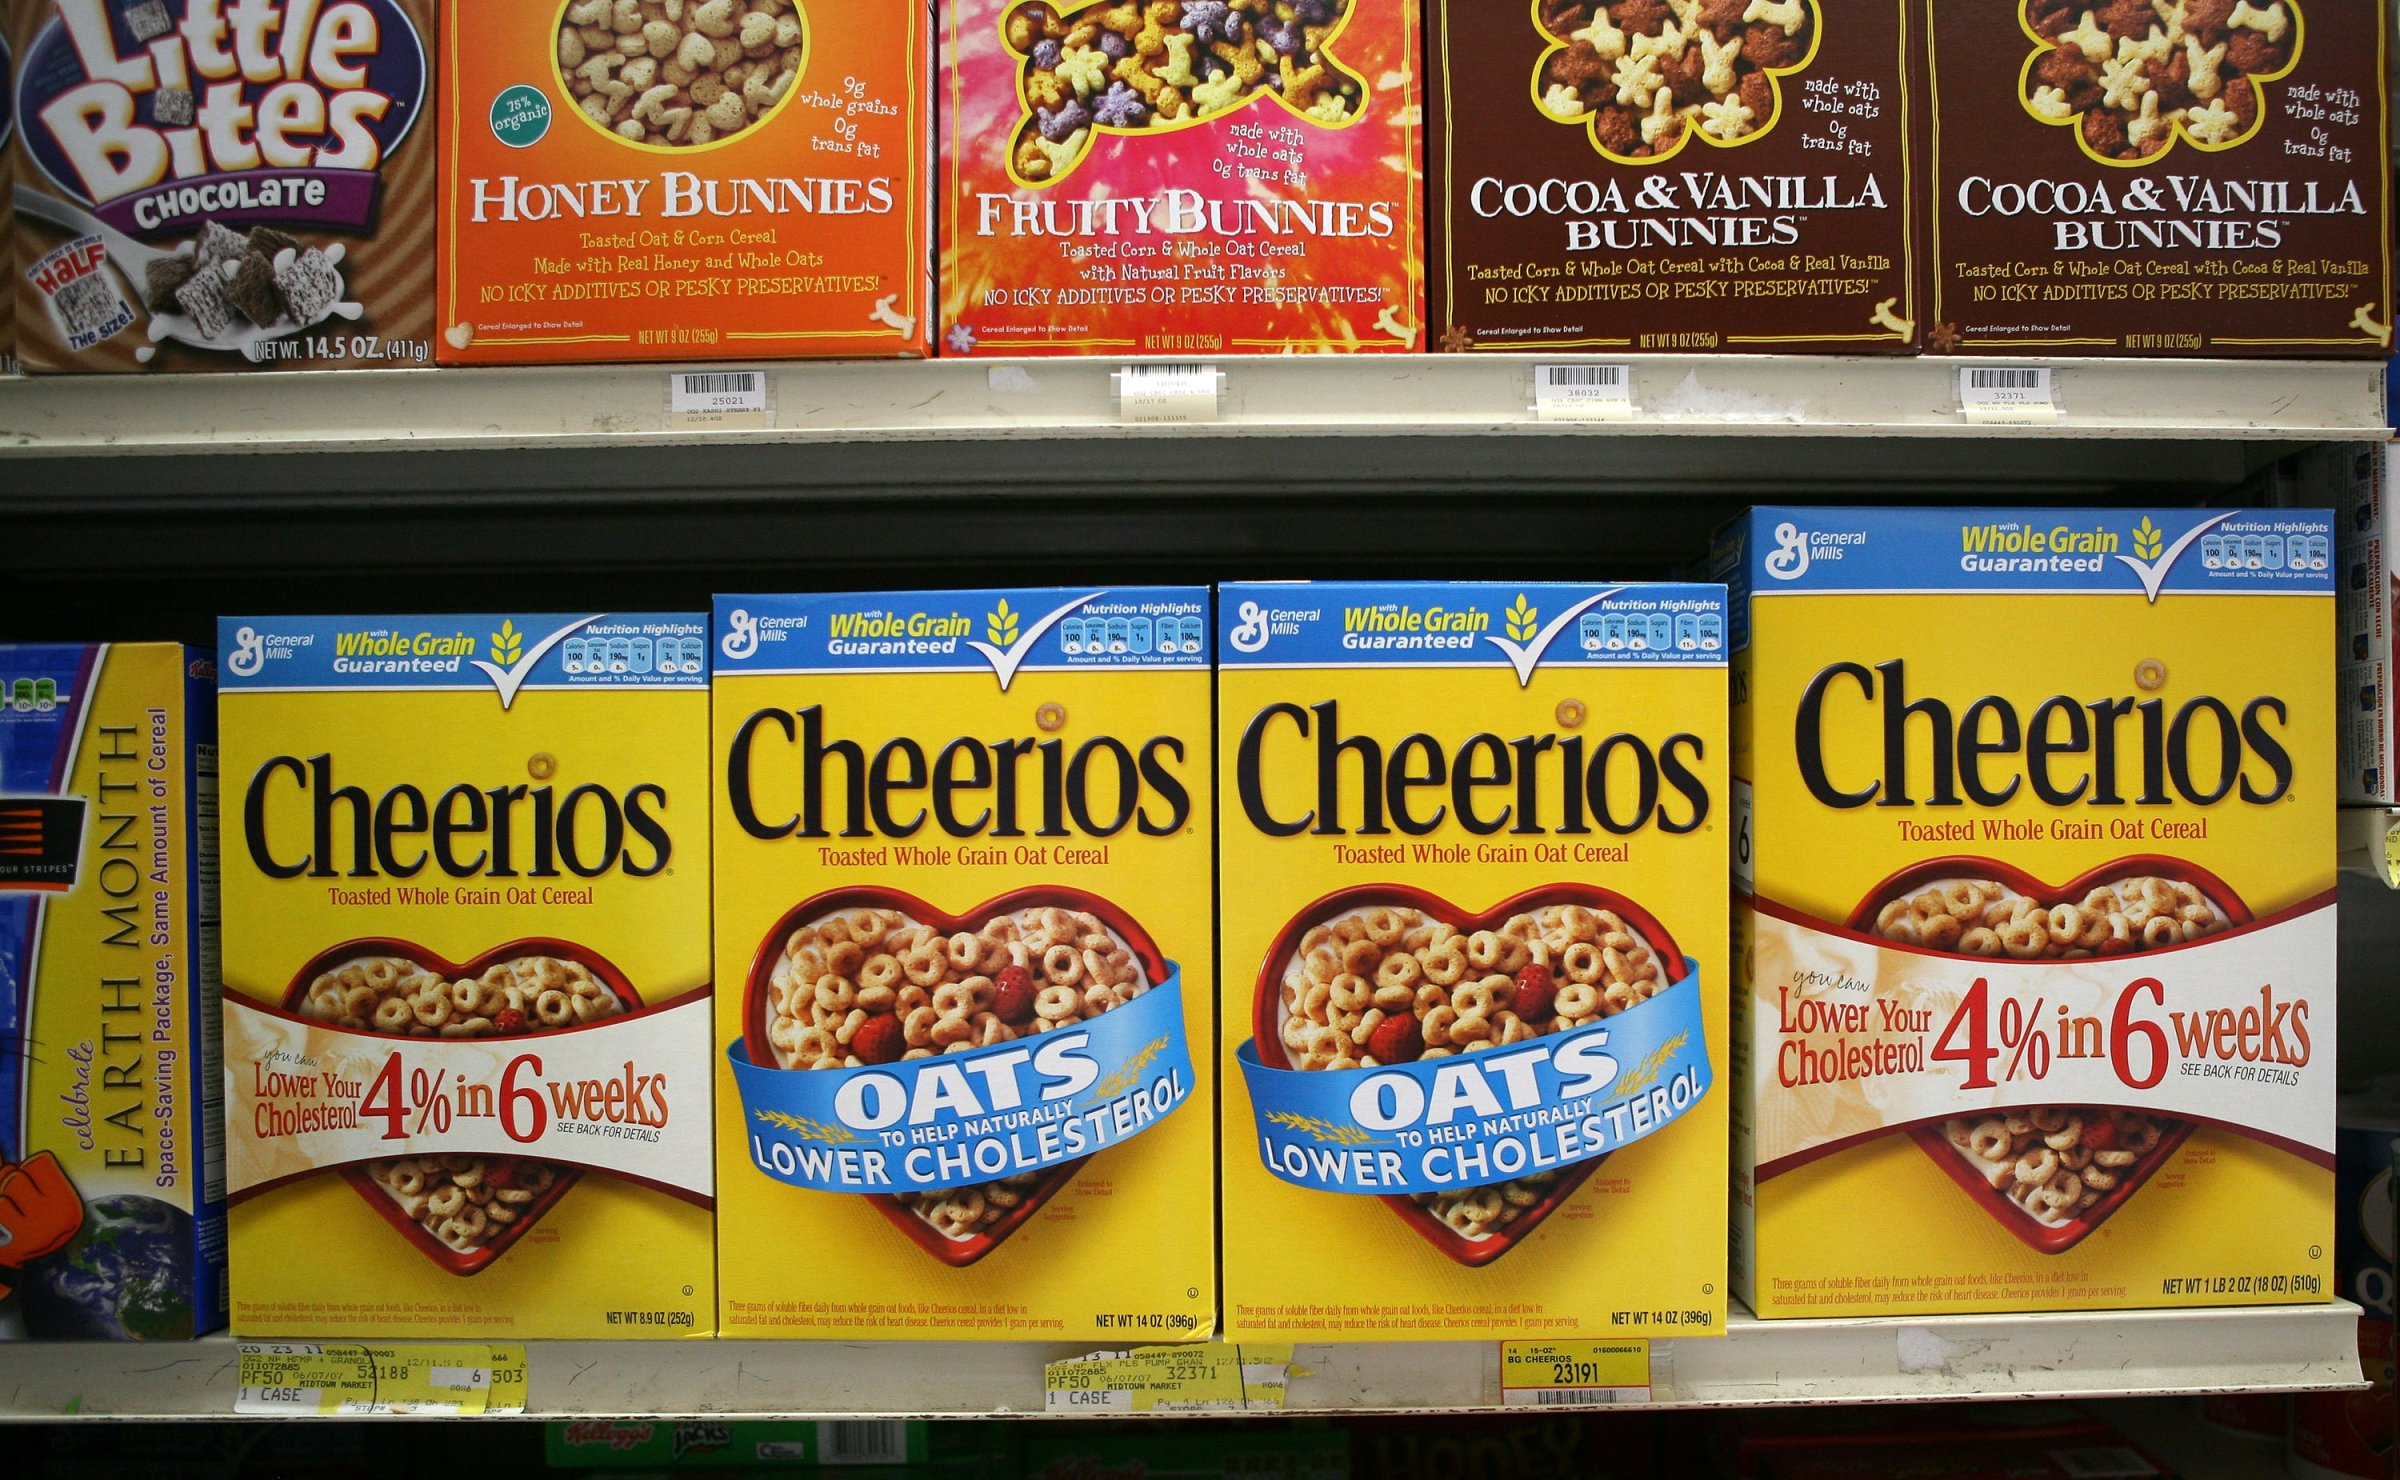 The FDA Disapproves Of Cheerios' Health Claims Printed On Its Boxes